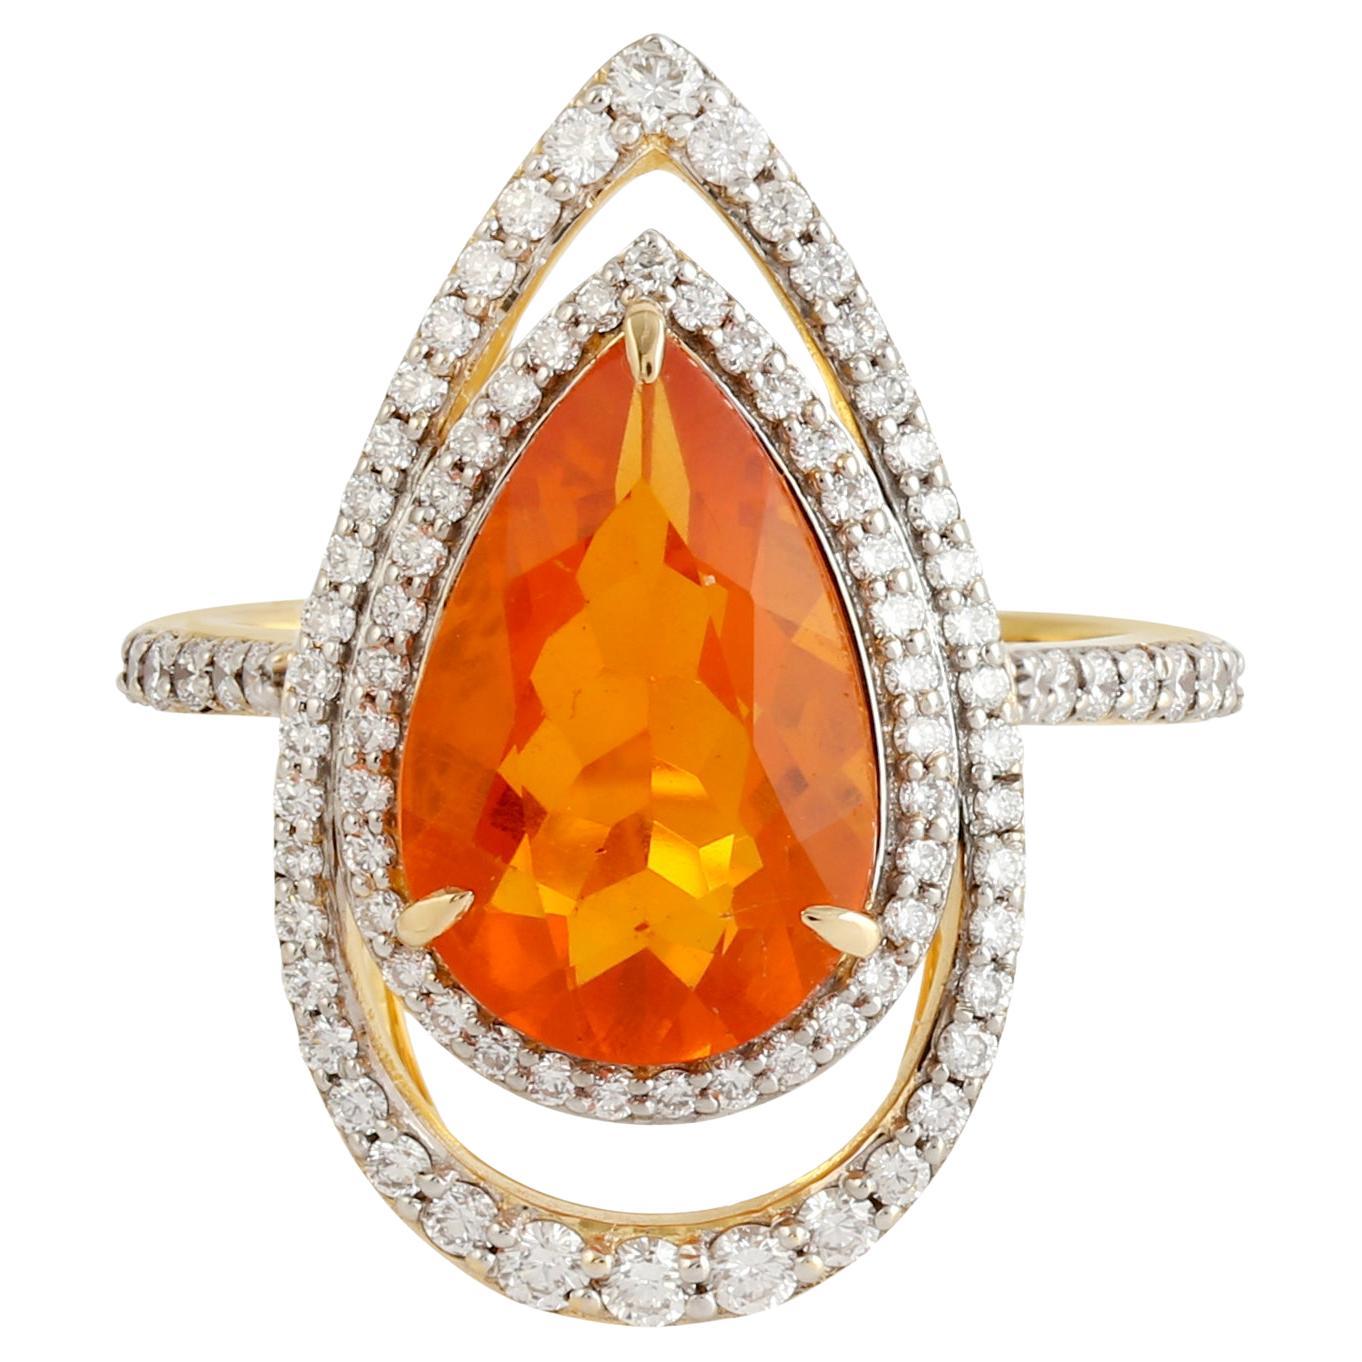 Pear Shaped Fire Opal Cocktail Ring With Diamonds Made In 18k Yellow Gold For Sale